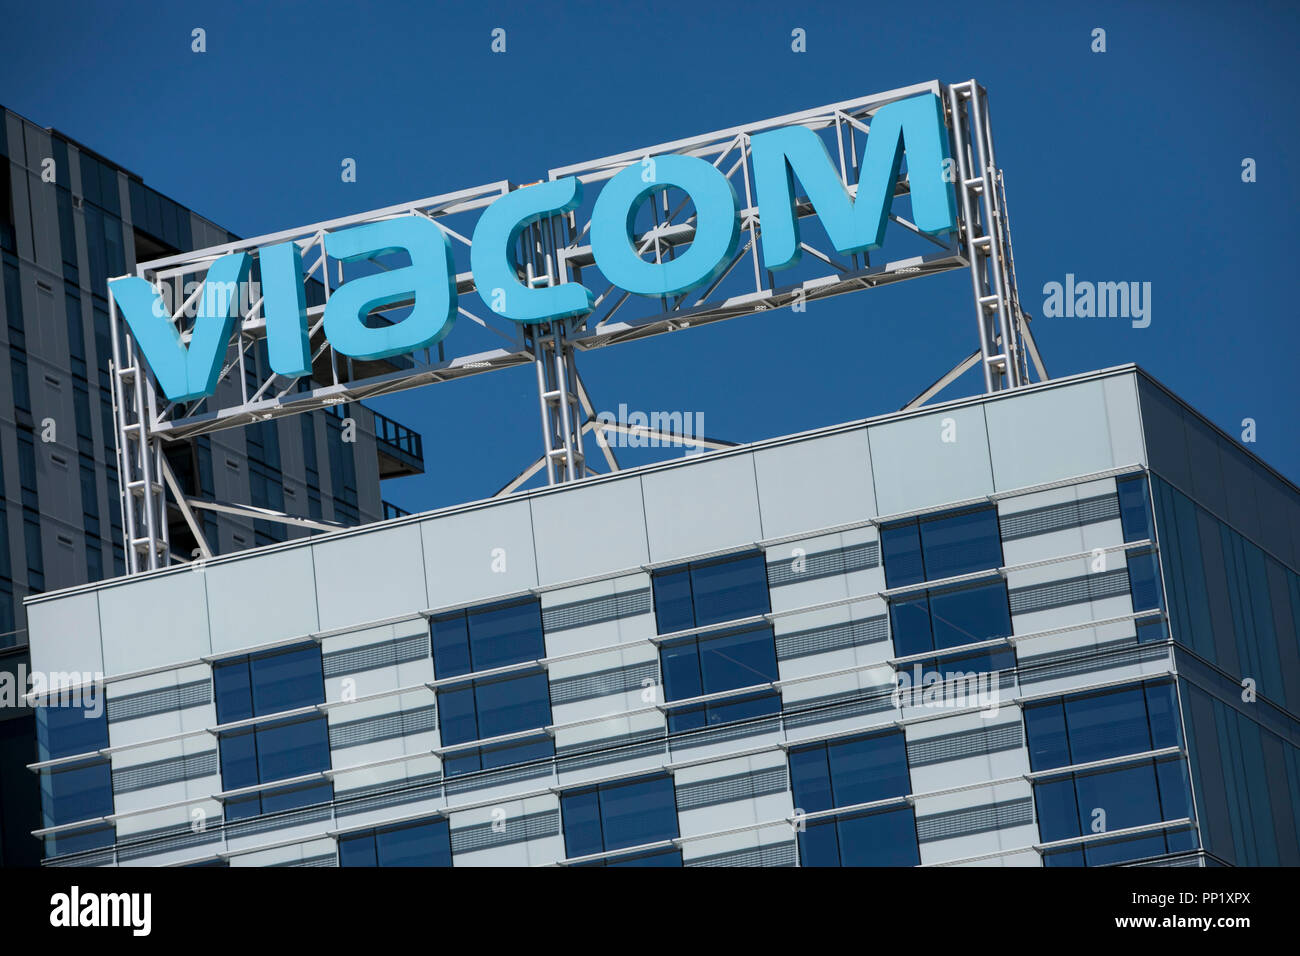 A logo sign outside of a facility occupied by Viacom in Los Angeles, California on September 15, 2018. Stock Photo